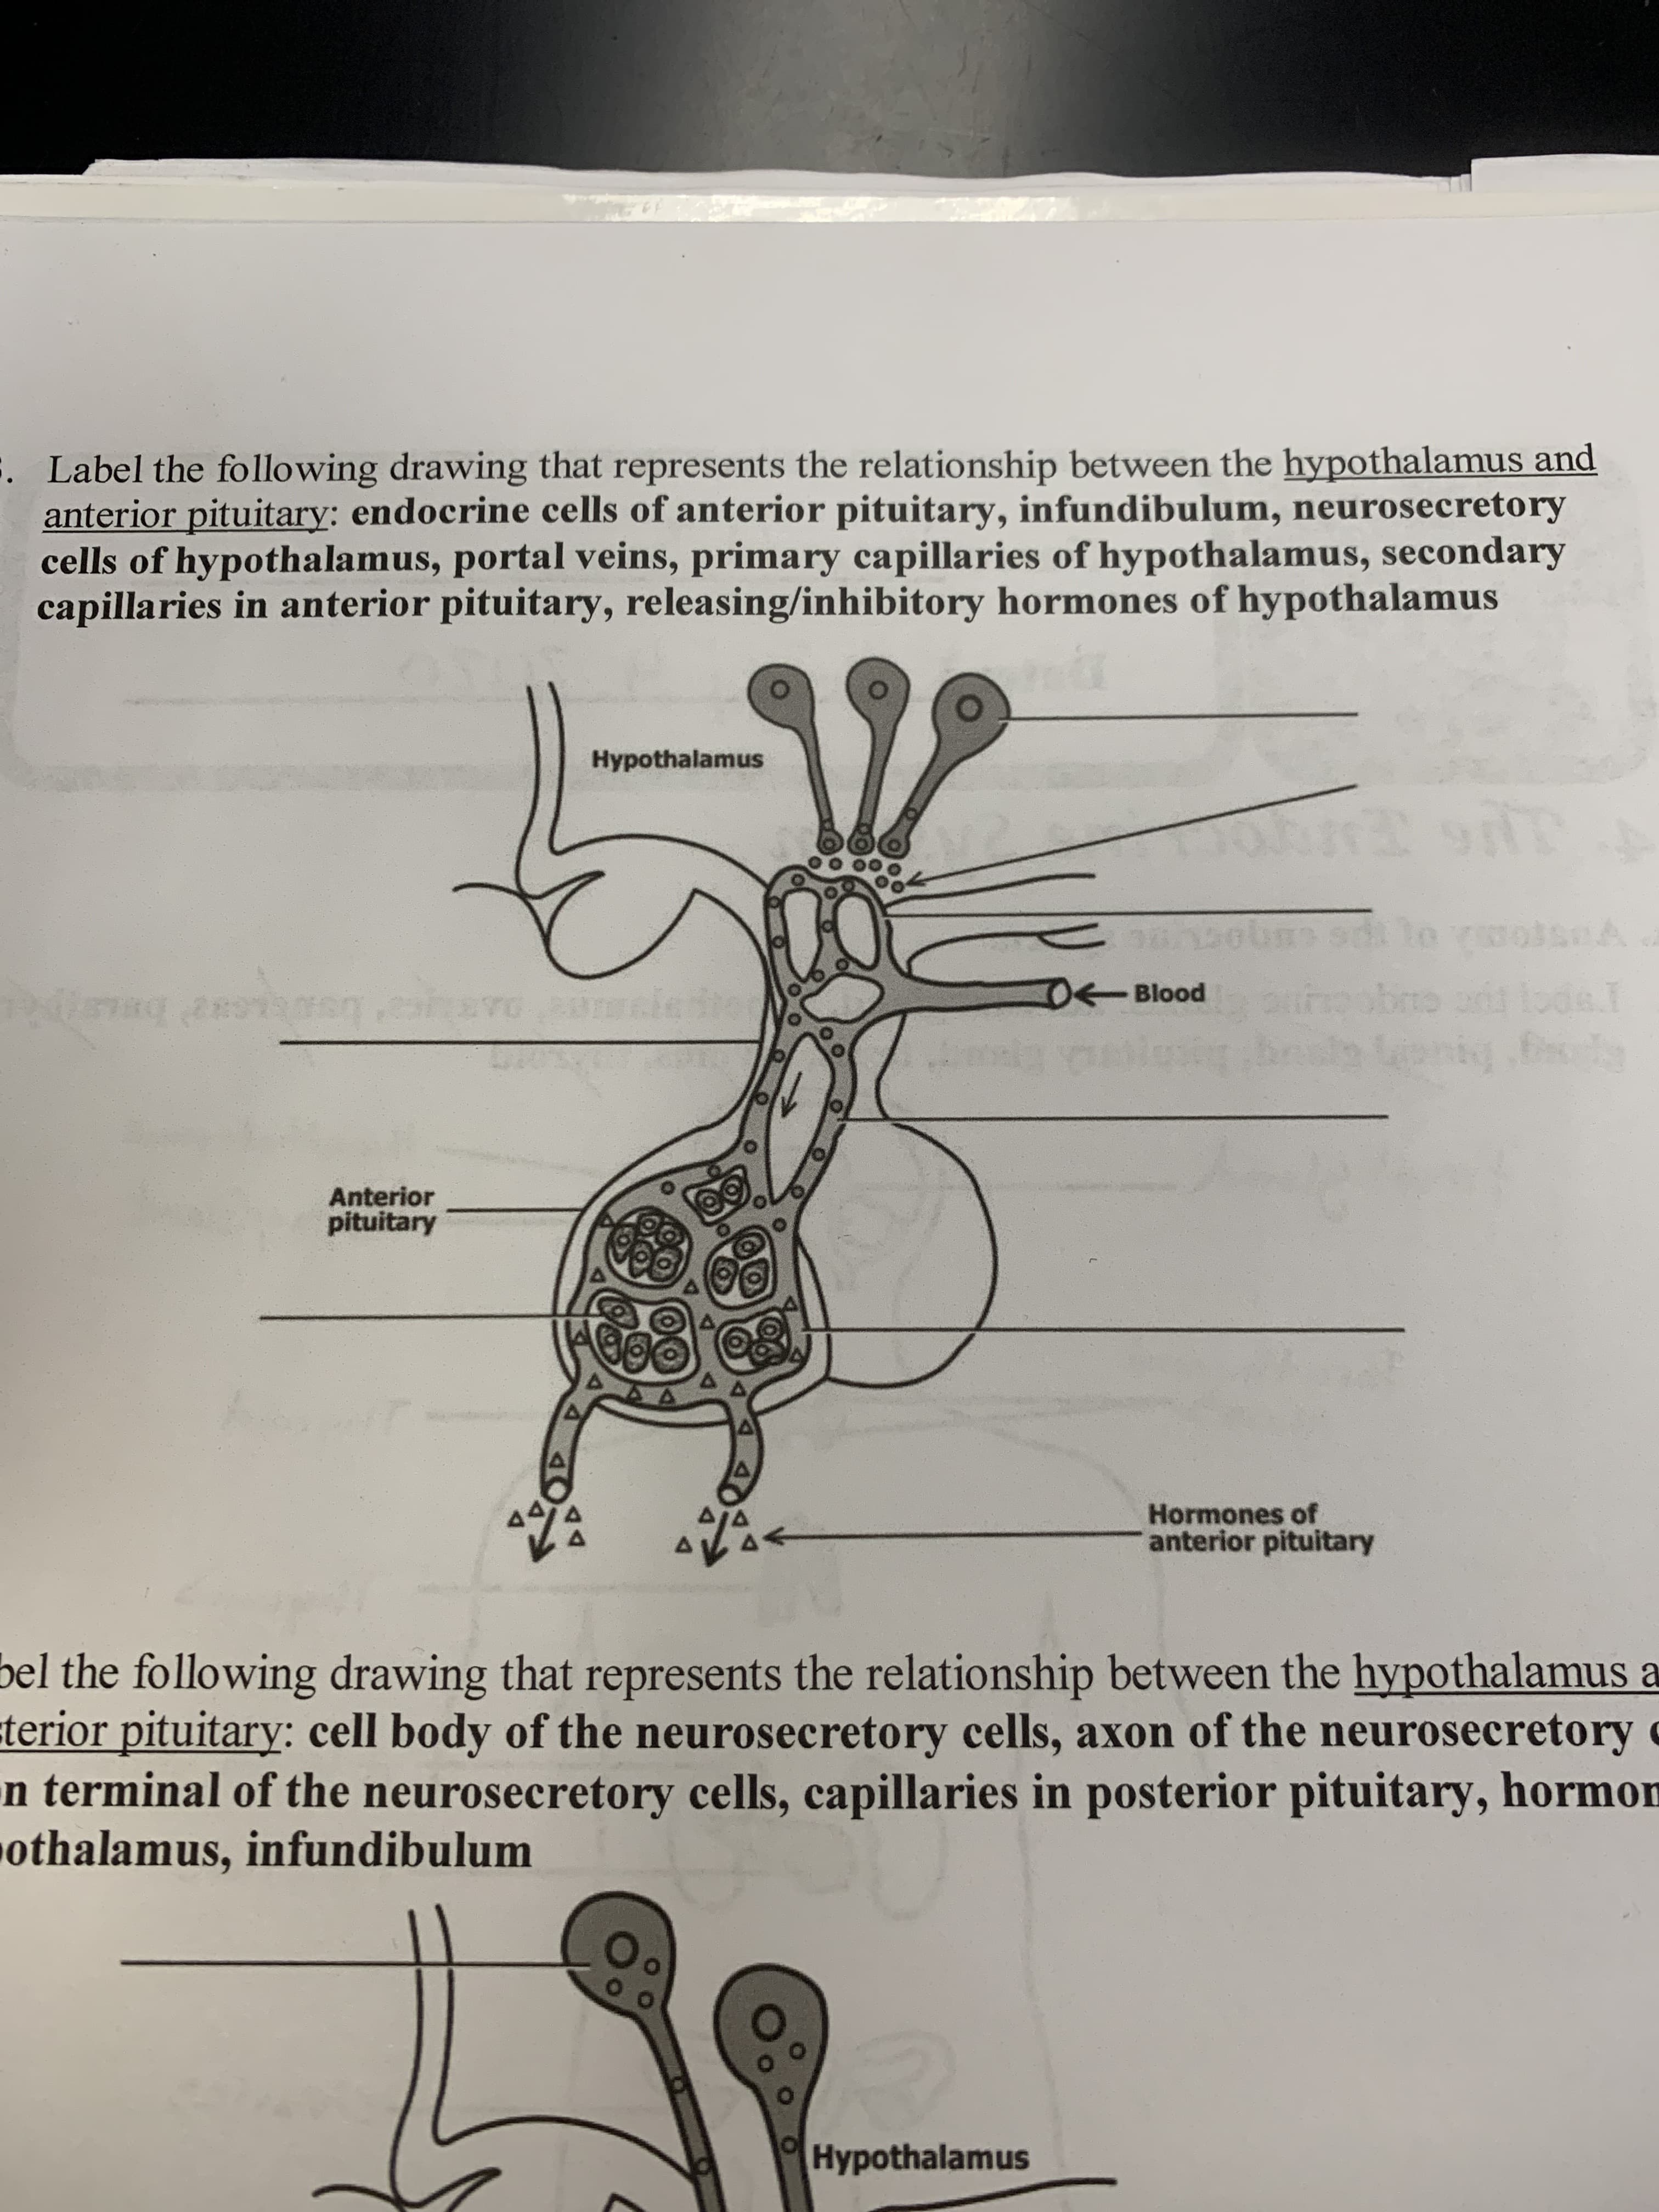 . Label the following drawing that represents the relationship between the hypothalamus and
anterior pituitary: endocrine cells of anterior pituitary, infundibulum, neurosecretory
cells of hypothalamus, portal veins, primary capillaries of hypothalamus, secondary
capillaries in anterior pituitary, releasing/inhibitory hormones of hypothalamus
Hypothalamus
to wolsnA
OBlood
Anterior
pituitary
Hormones of
anterior pituitary
bel the following drawing that represents the relationship between the hypothalamus a
terior pituitary: cell body of the neurosecretory cells, axon of the neurosecretory c
n terminal of the neurosecretory cells, capillaries in posterior pituitary, hormon
othalamus, infundibulum
Hypothalamus
